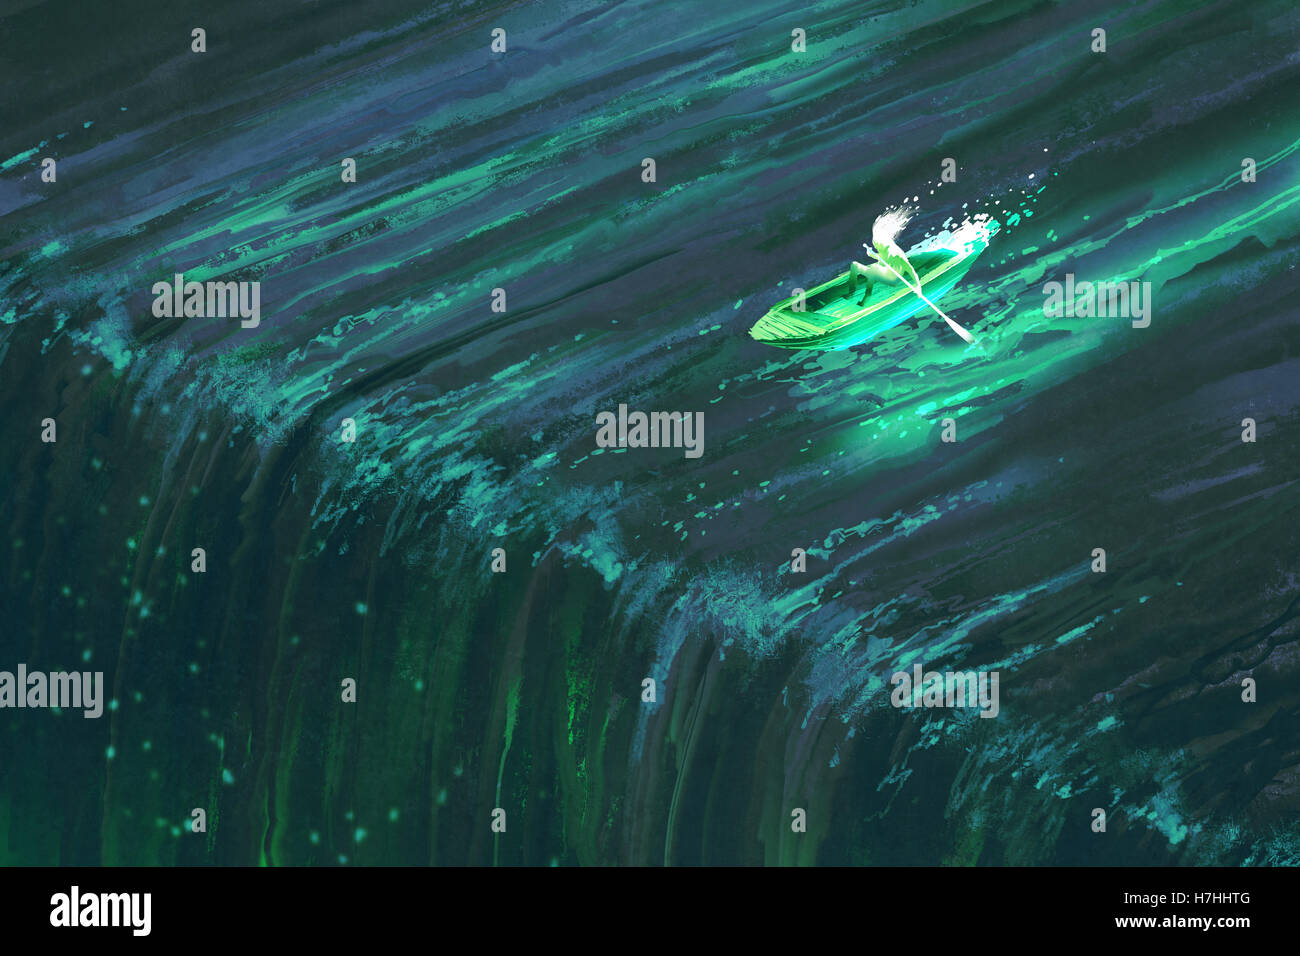 man rowing in glowing green boat near edge of waterfall,illustration painting Stock Photo